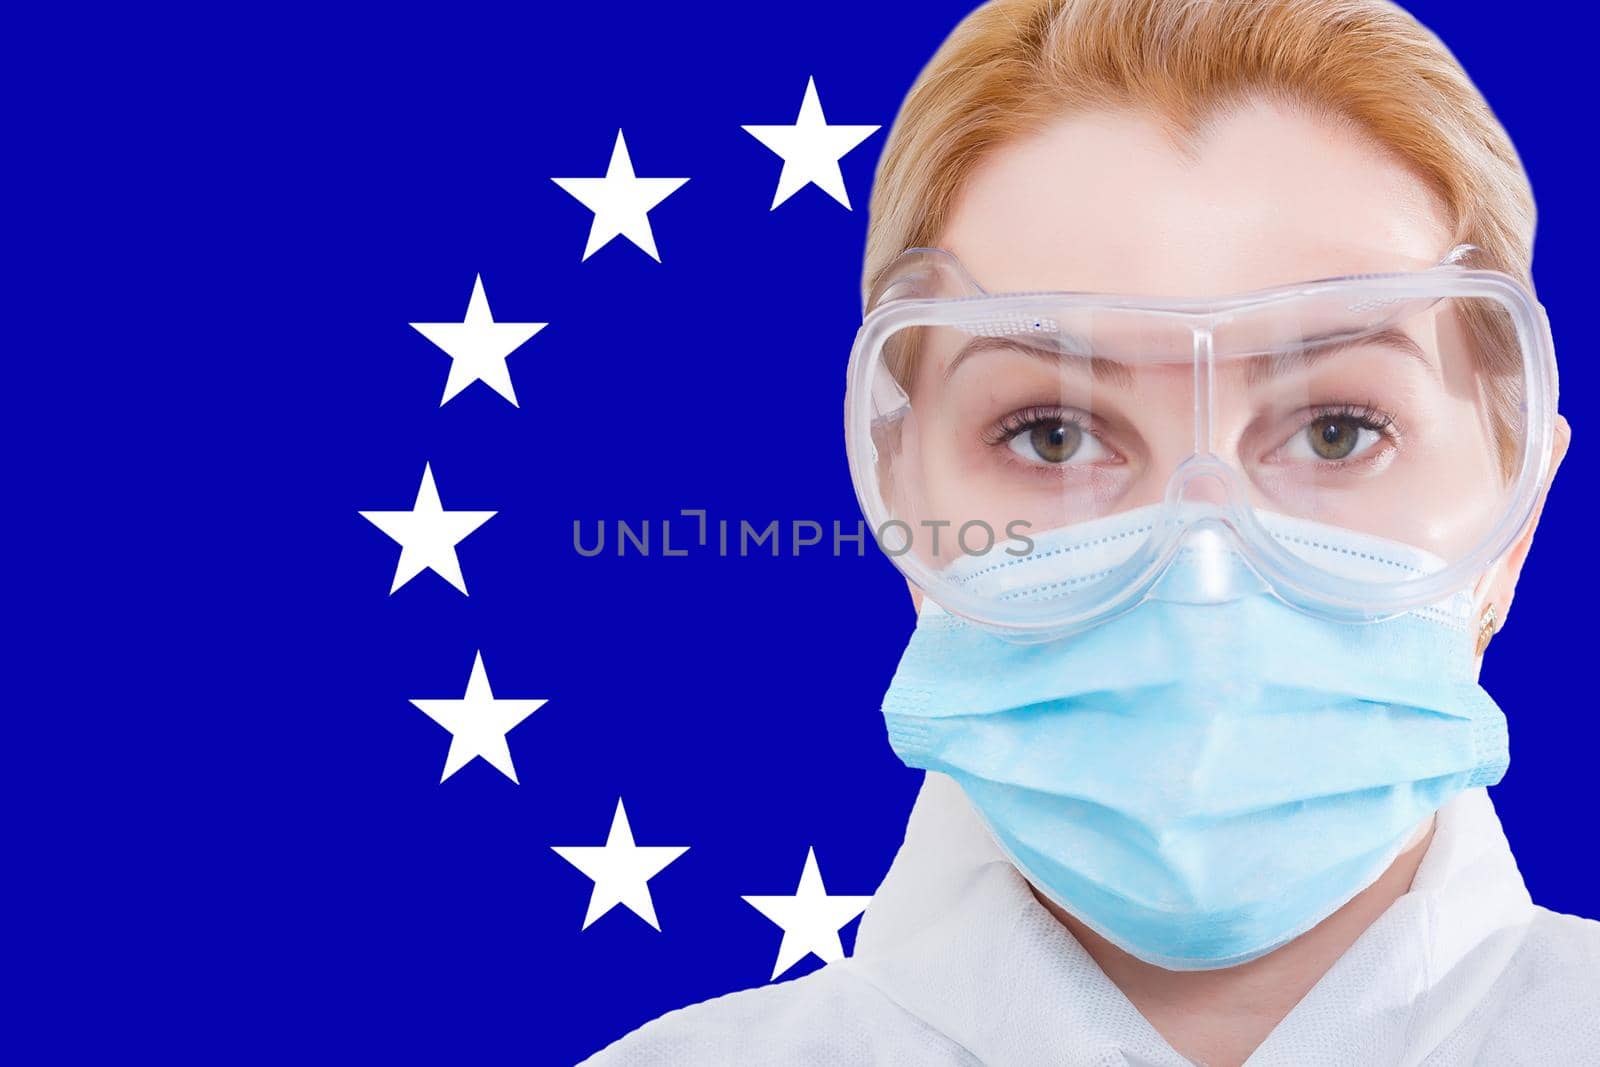 Masked woman face looking at the camera on flag European Union background. The concept of attention to the worldwide spread of the coronavirus worldwide. Coronavirus, virus in EU.